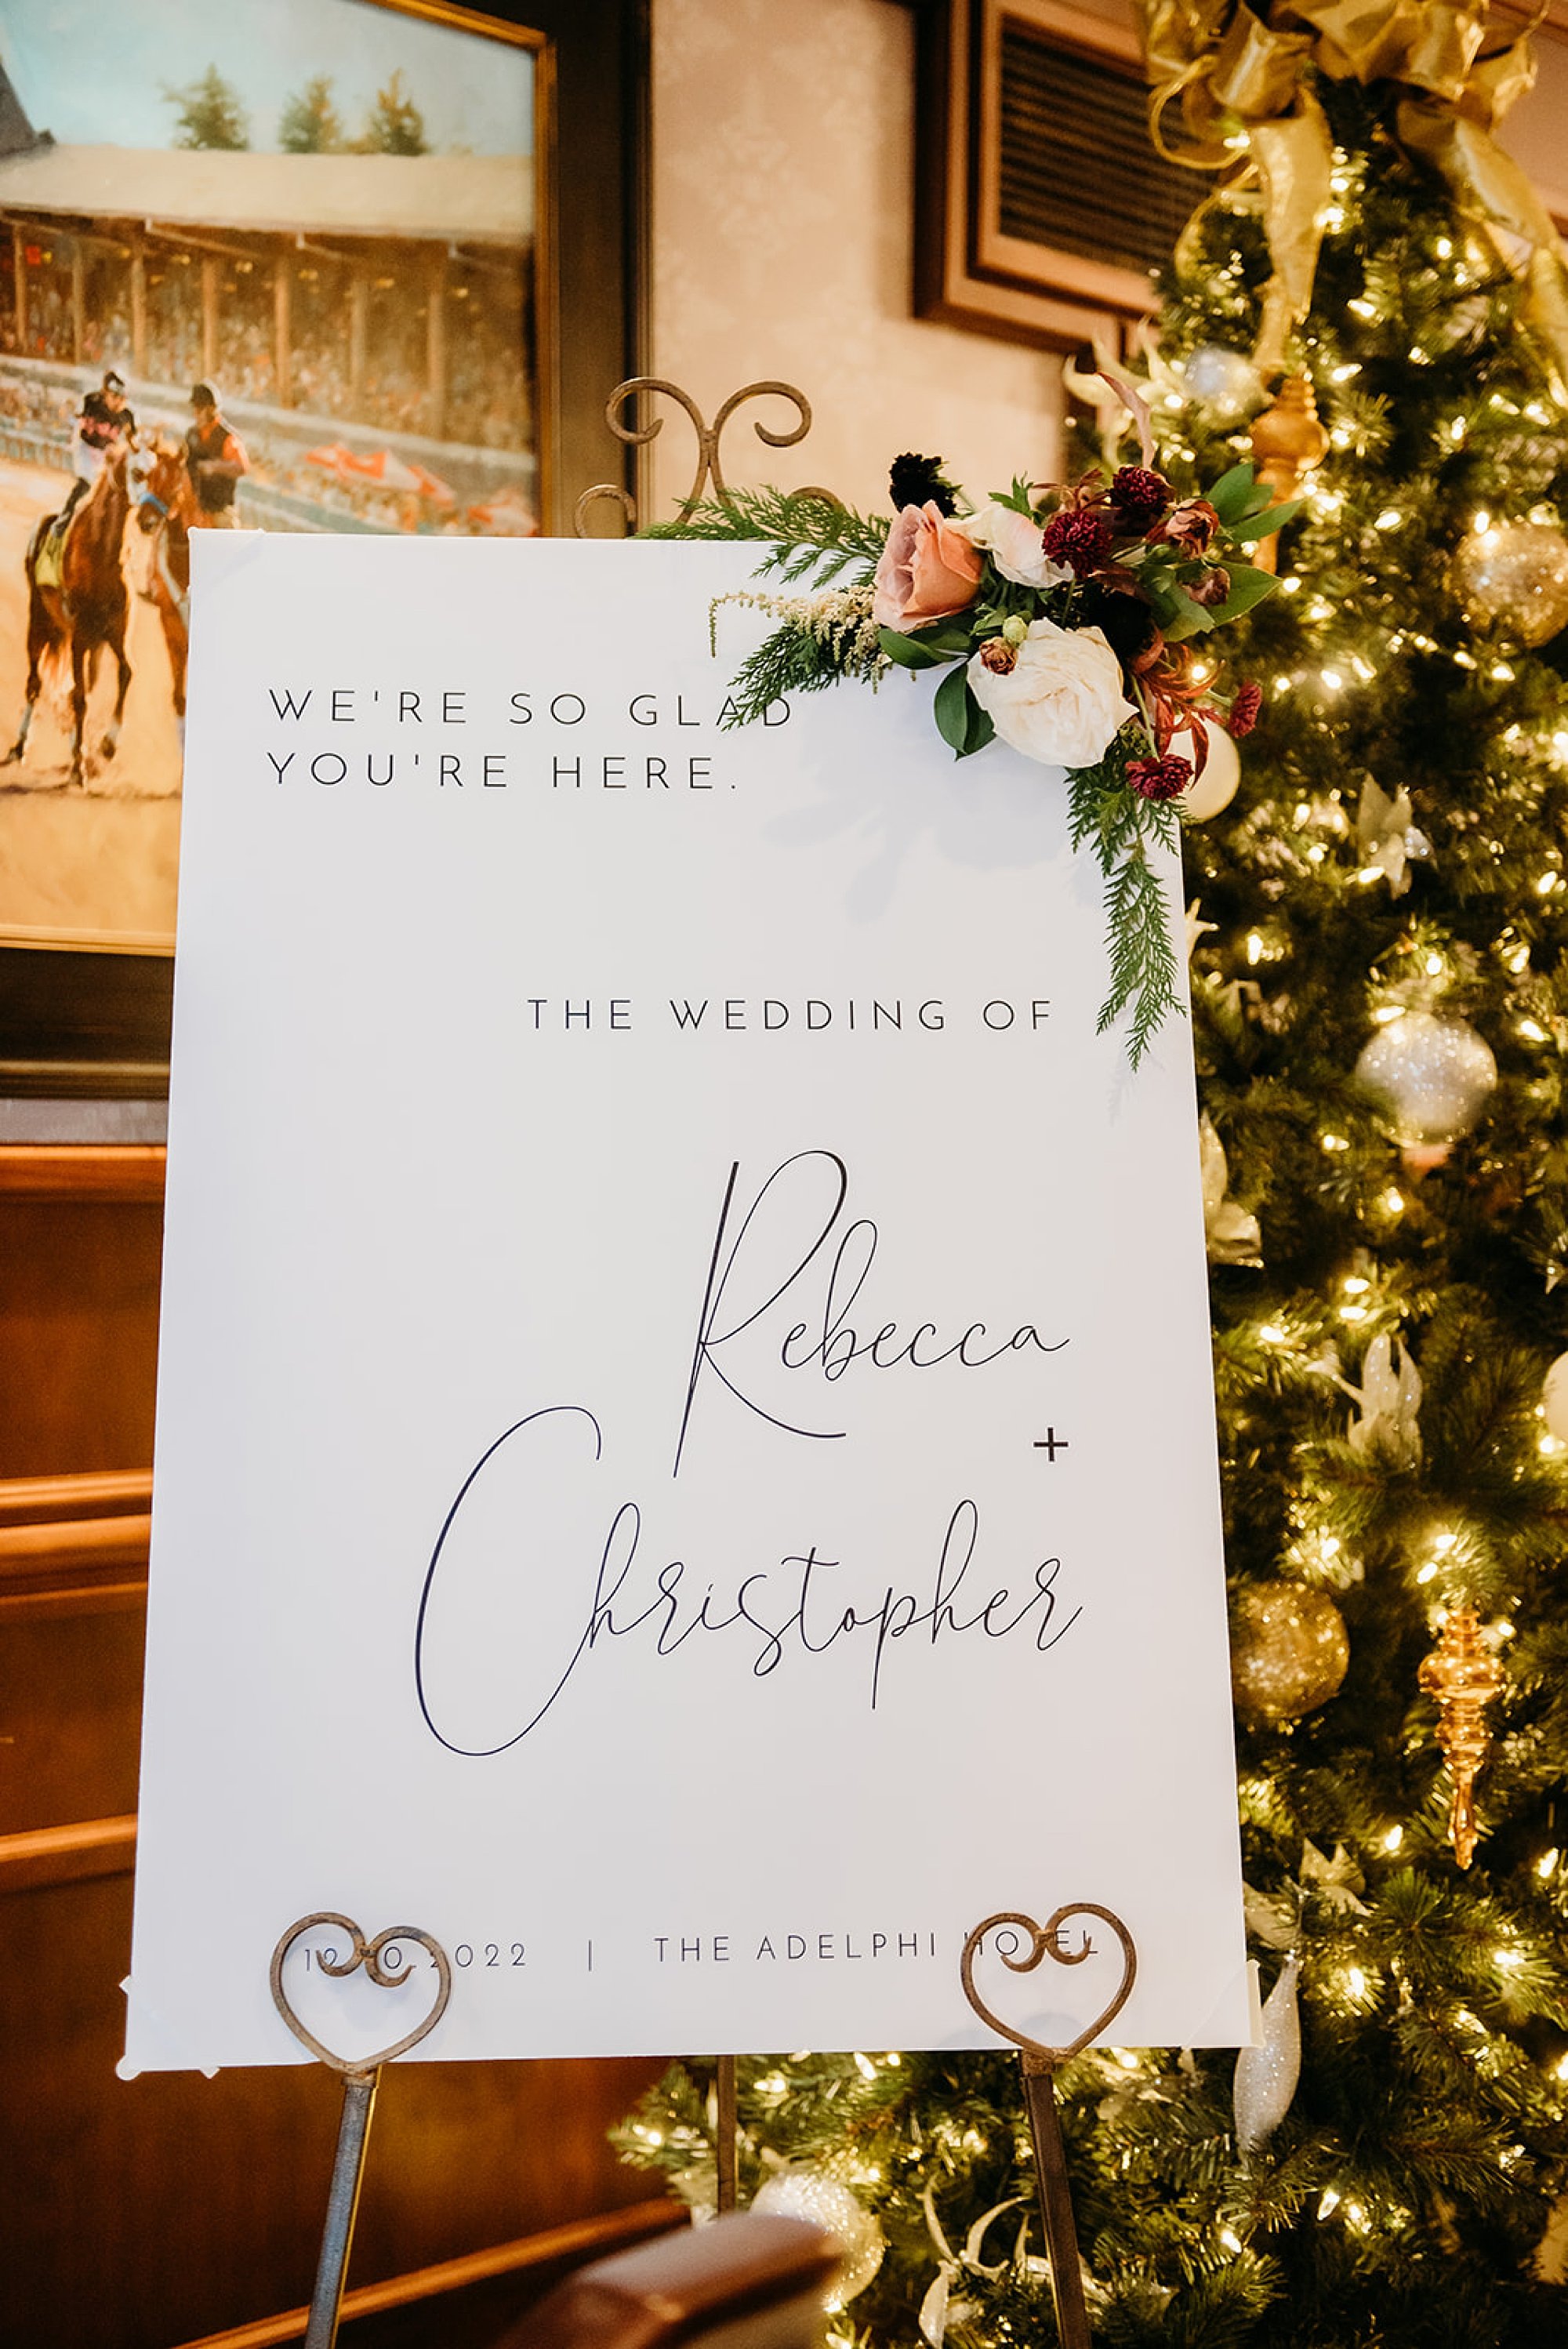 welcome sign for Christmas wedding ceremony at The Adelphi Hotel